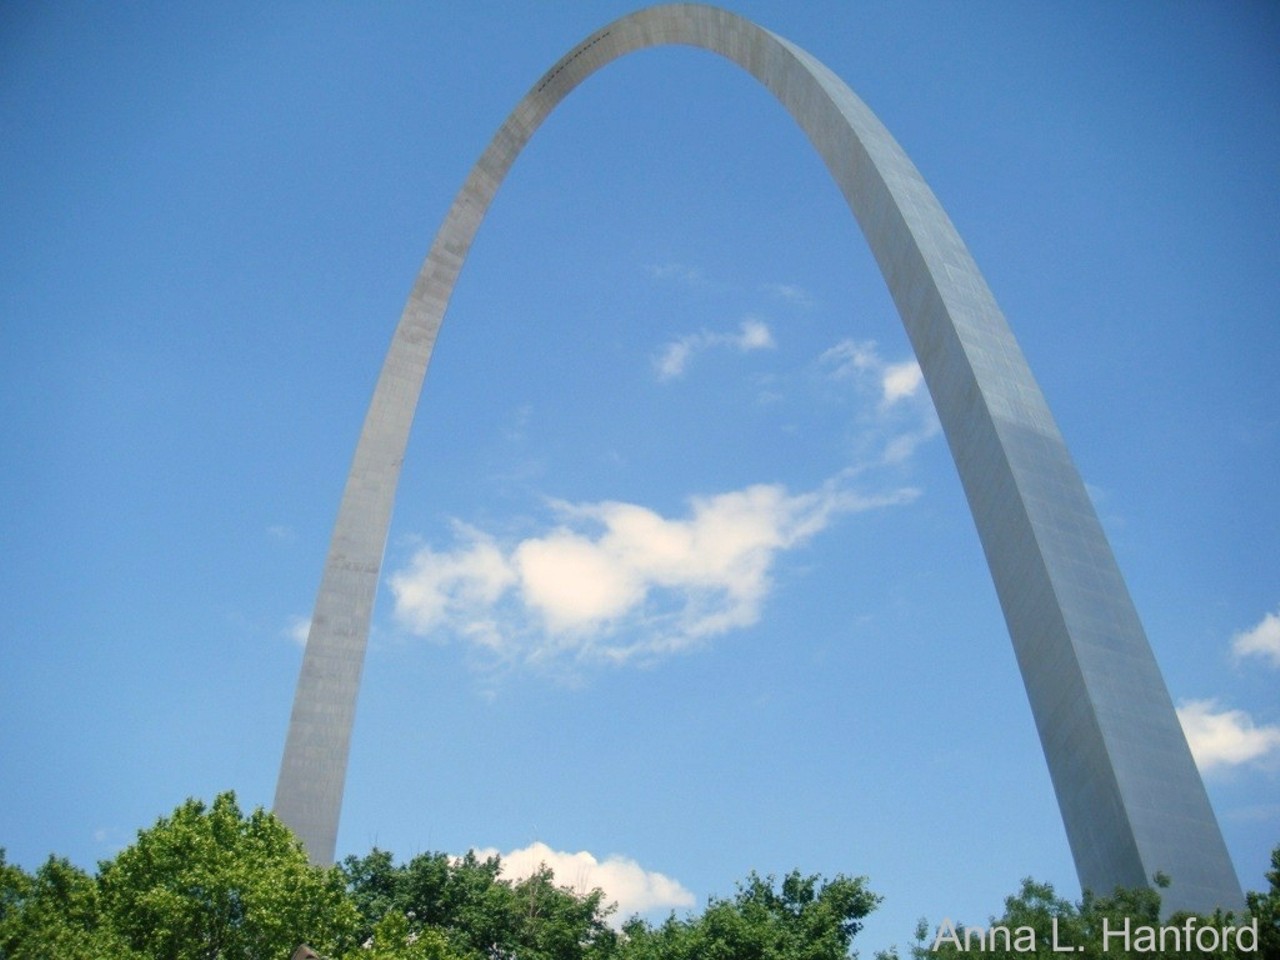 Gateway Arch
Walter H, 1 star 
"Complete shit, never going back. Not like it used to be."